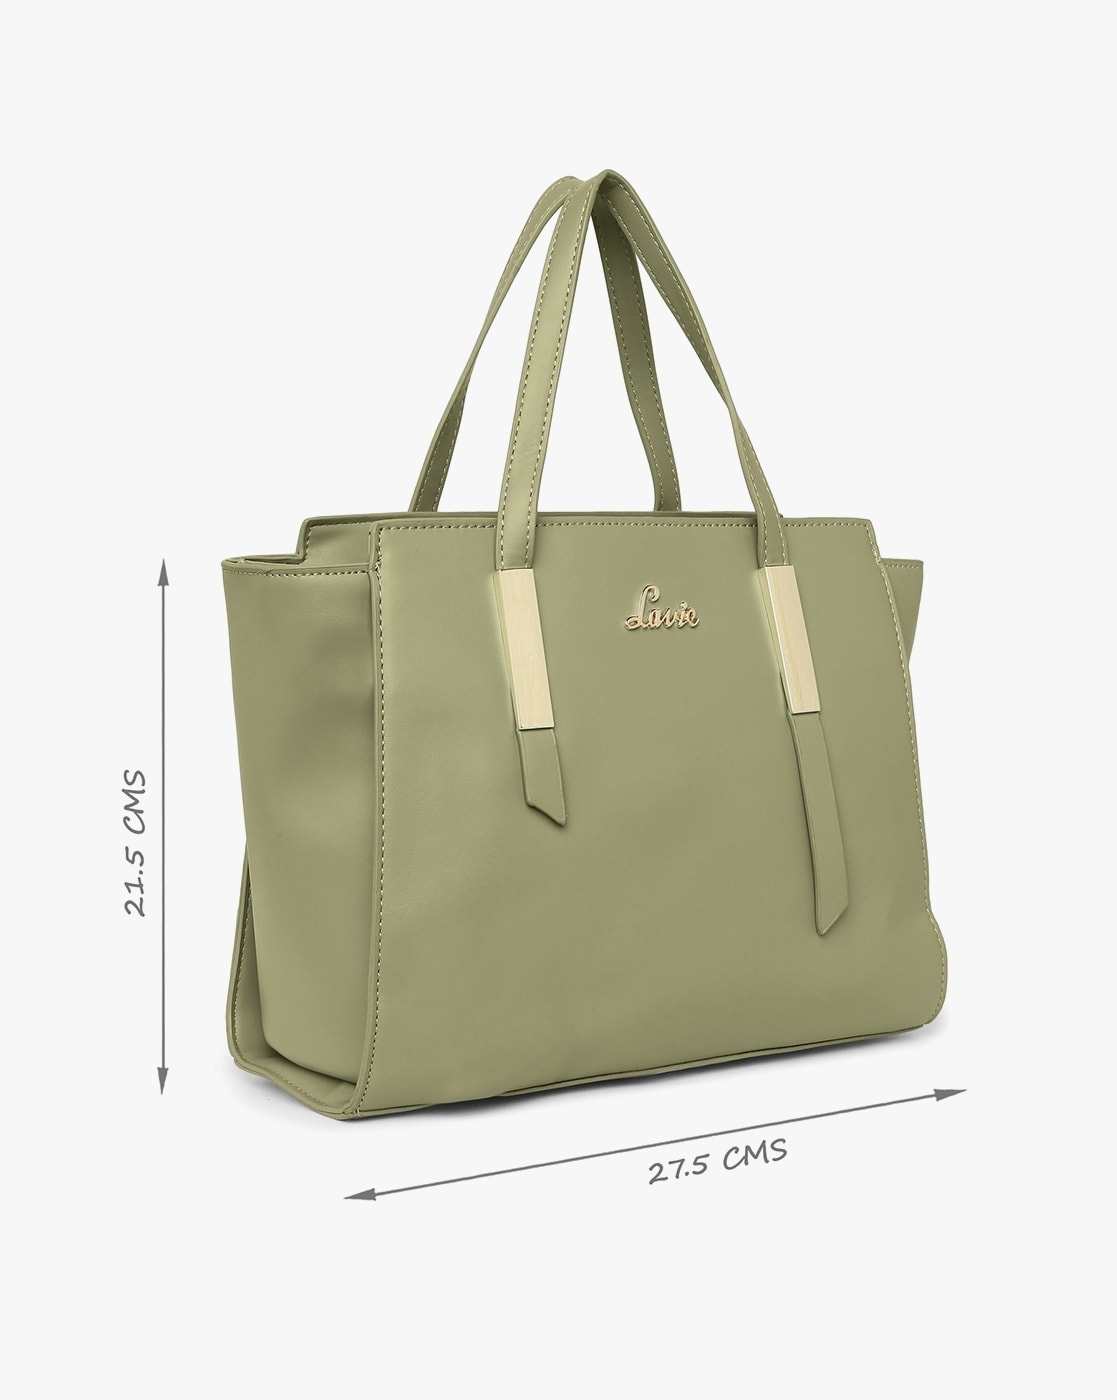 Buy Handbags Online Sale Online In India At Best Price Offers | Tata CLiQ